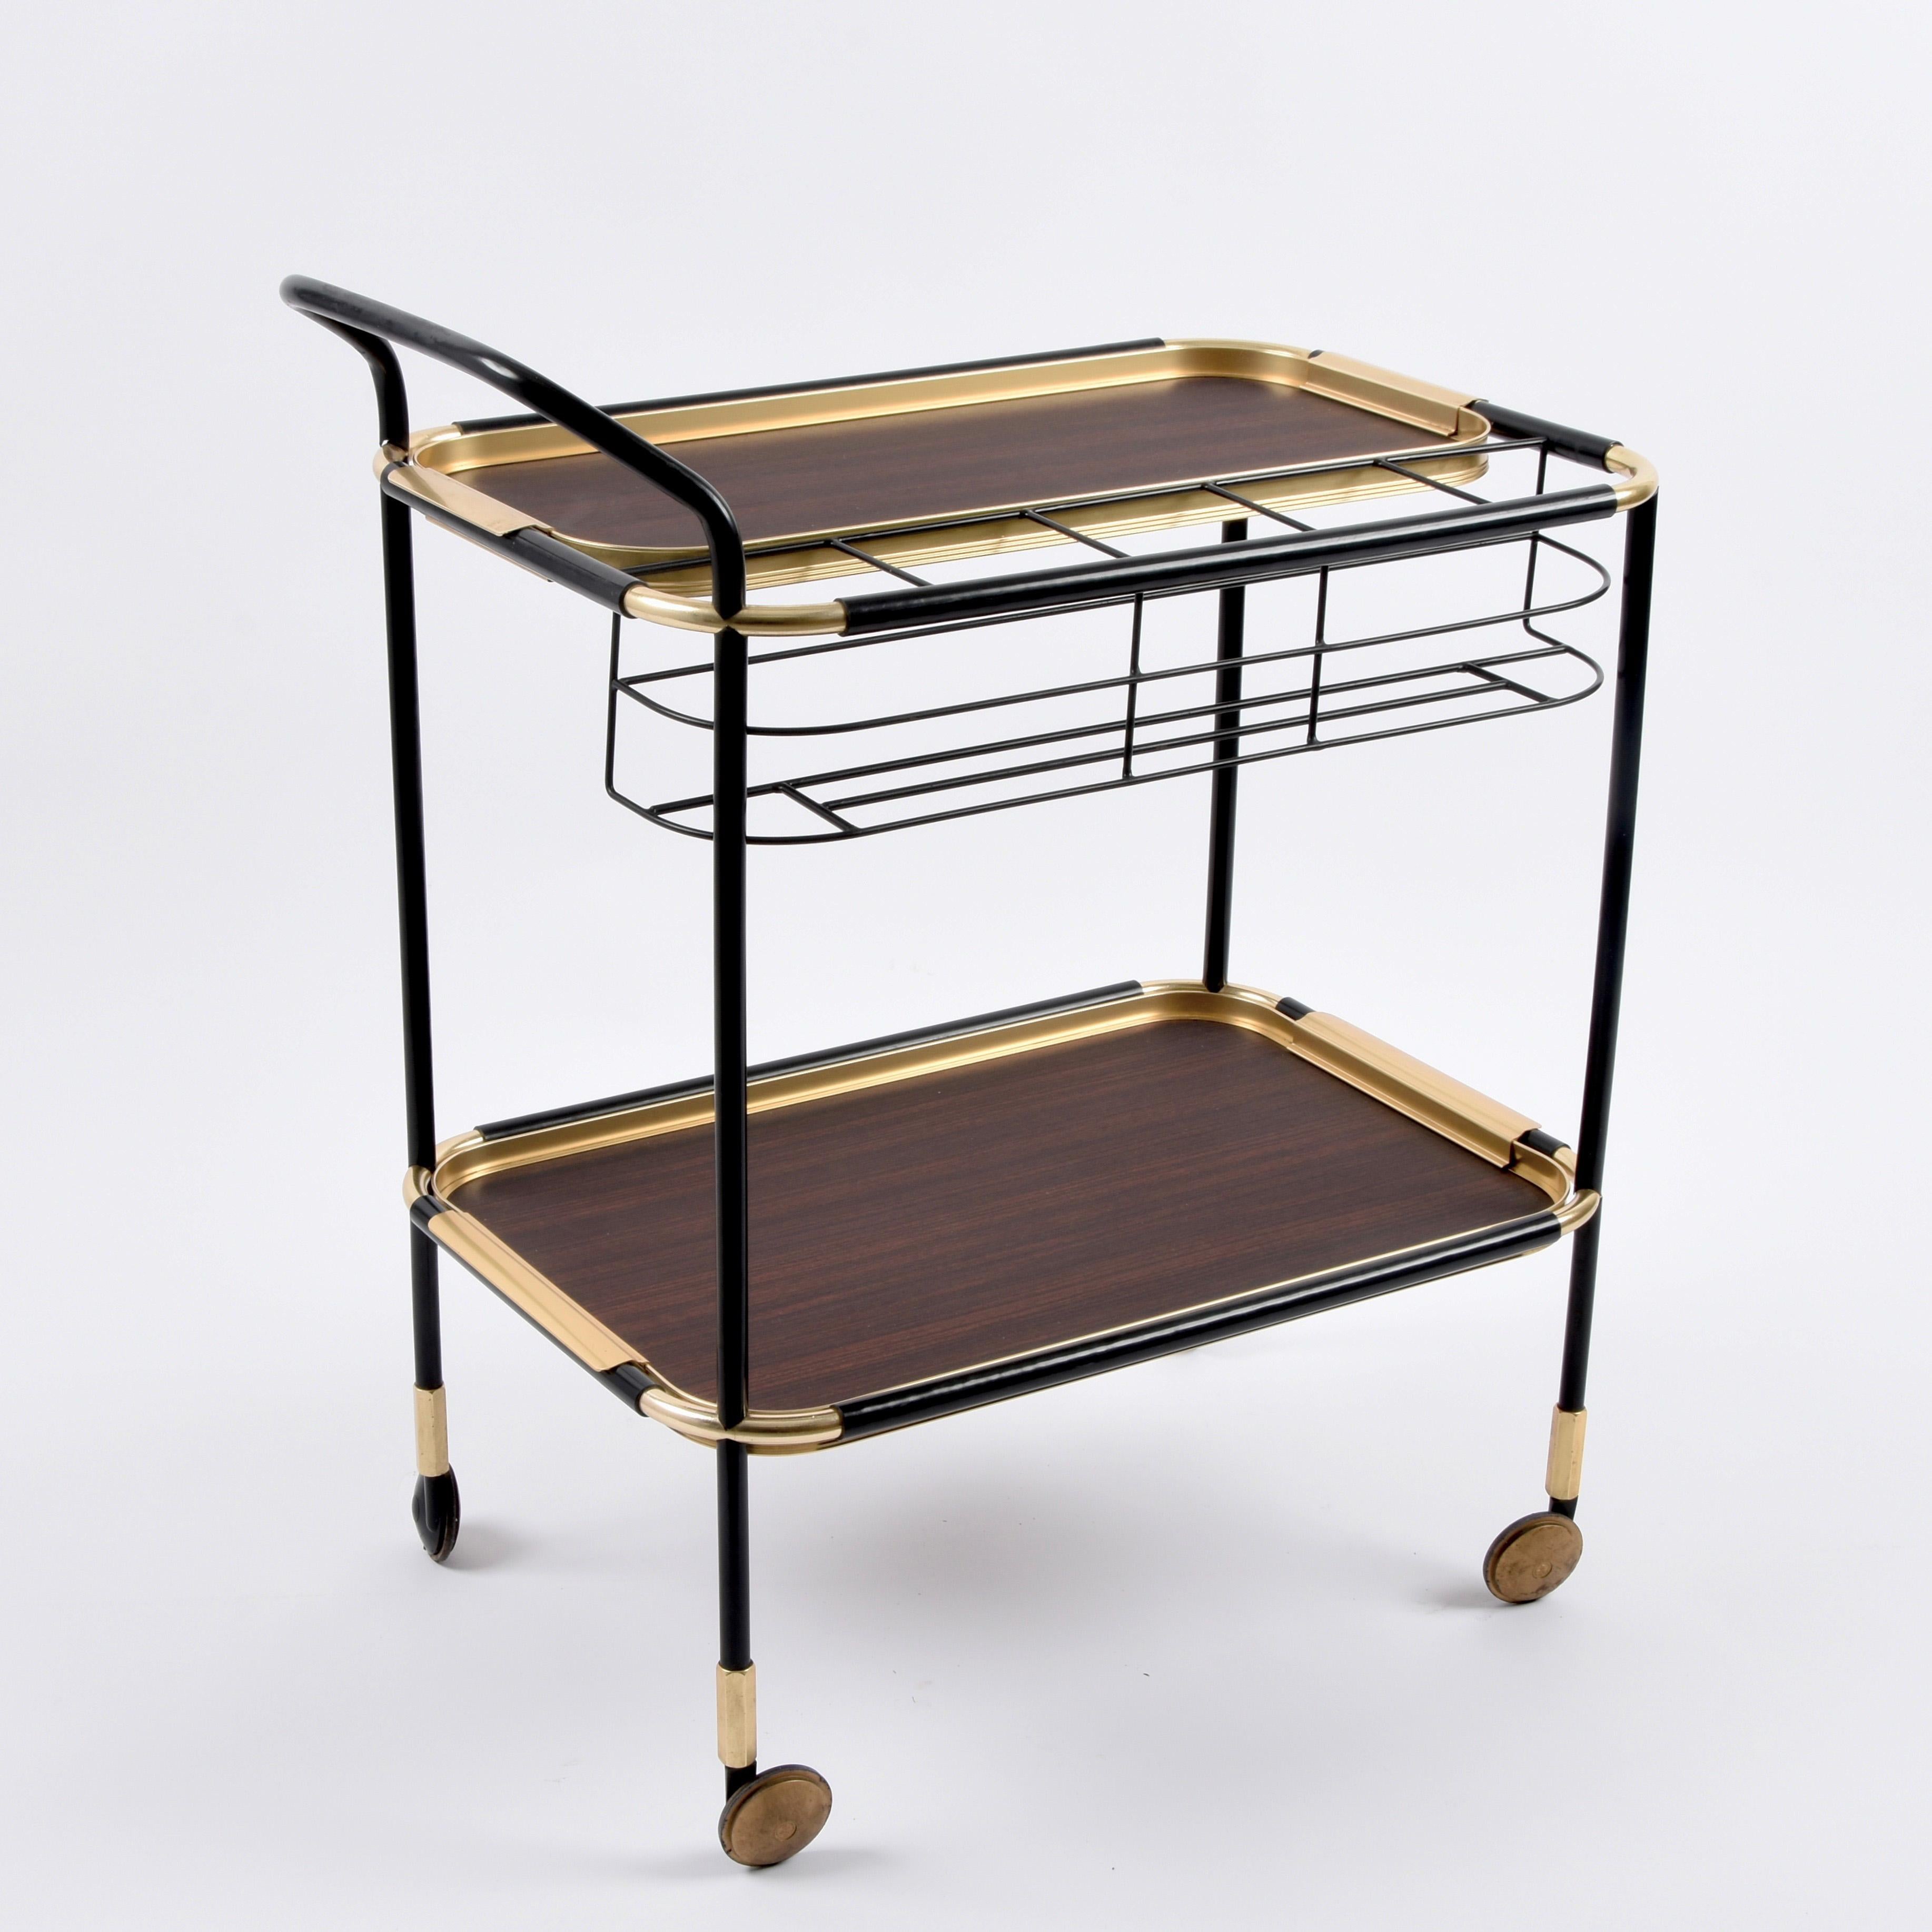 Elegant bottle trolley with two pull-out trays in Khaya Anthotheca Mahogany with mid-century gold aluminium and brass handles. This fantastic piece was designed in Italy by Ico and Luisa Parisi for Mb Italia in the 1960s.

This item surprises for